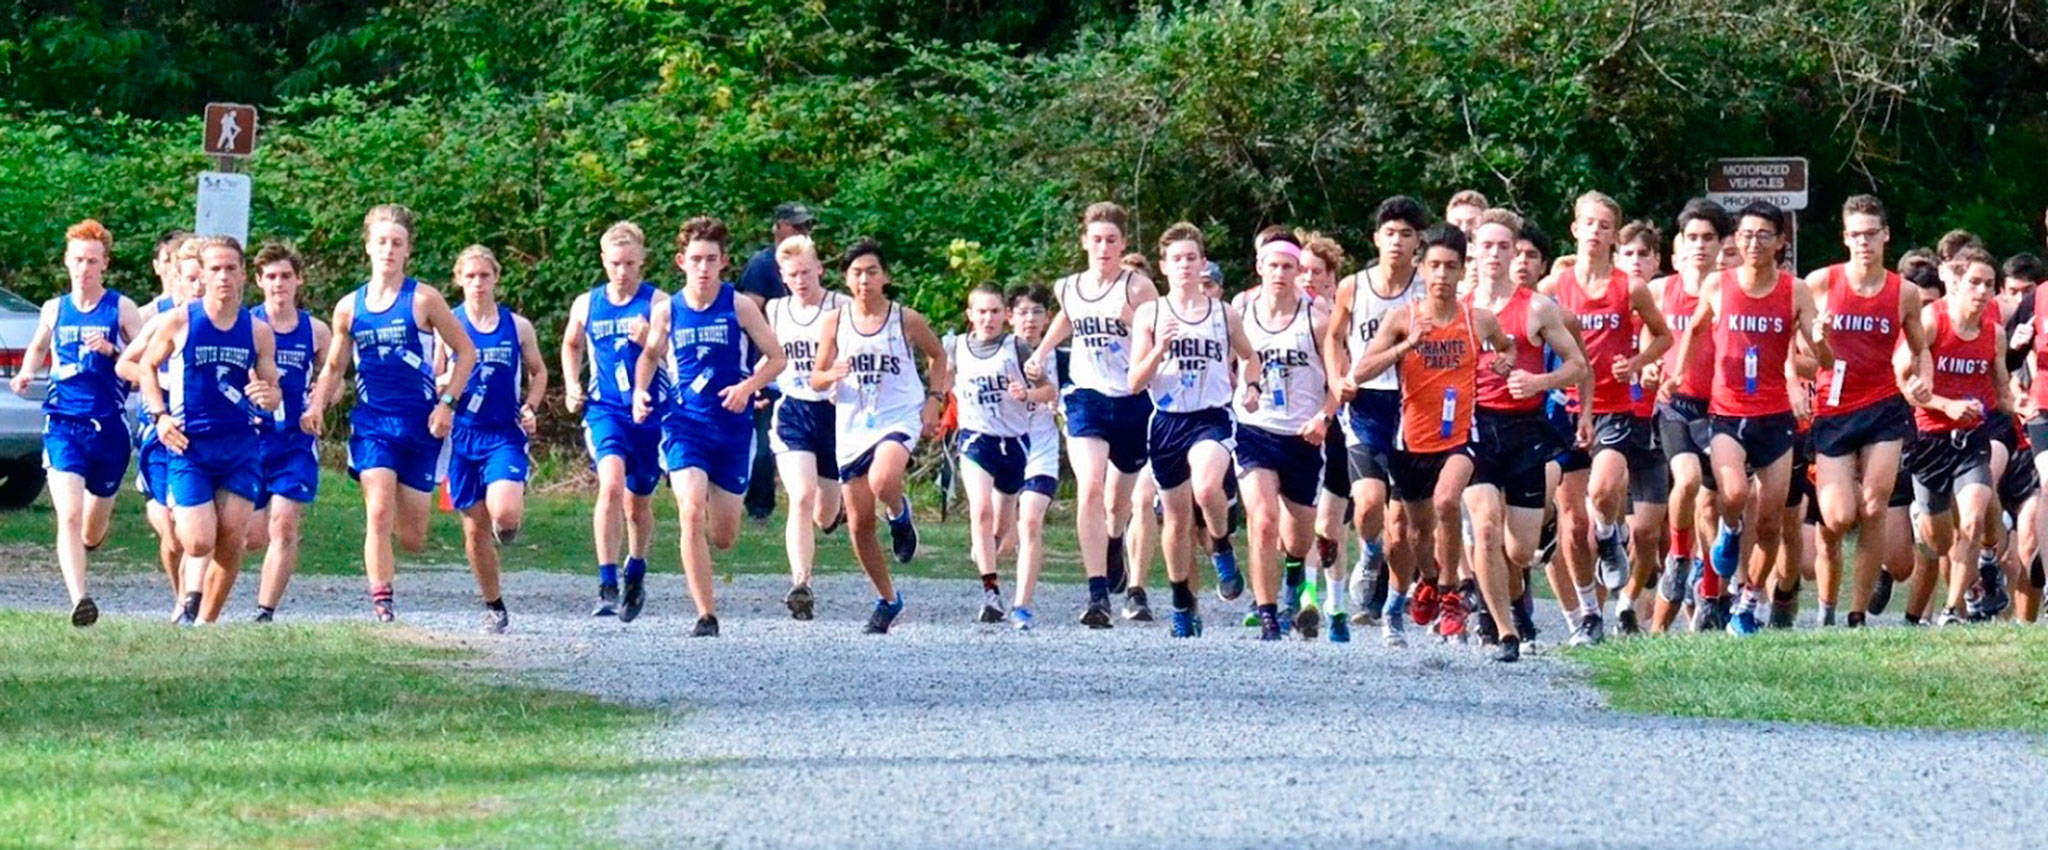 The South Whidbey boys team, left, takes off at the start of Thursday’s North Sound Conference preview cross country meet. (Photo by Matt Simms)